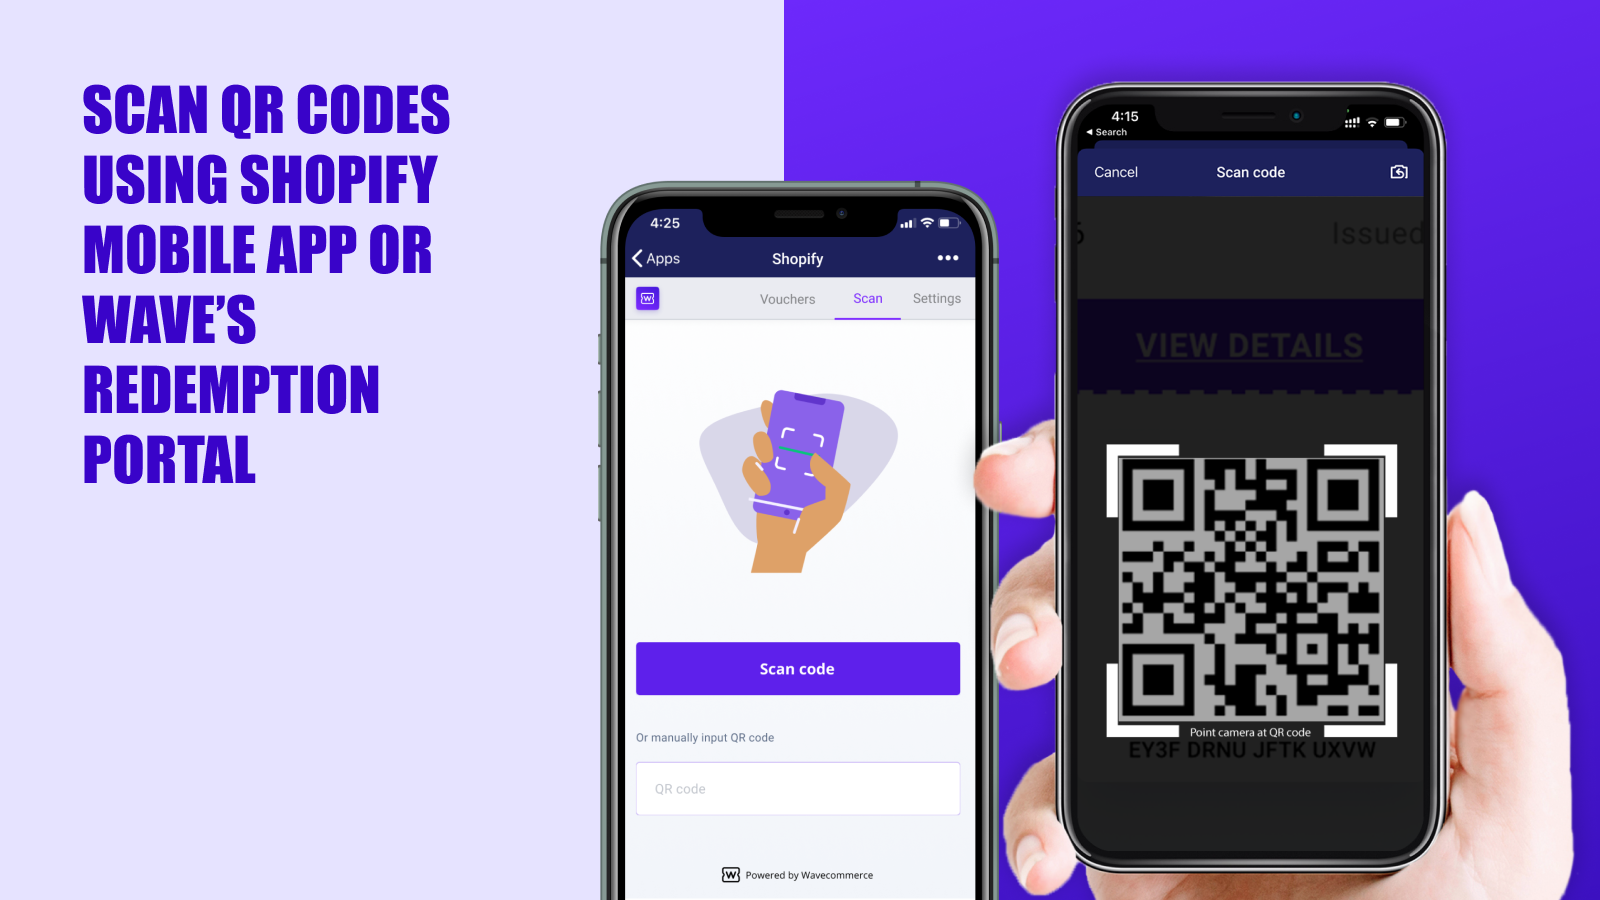 Scan using Shopify mobile app to redeem QR codes